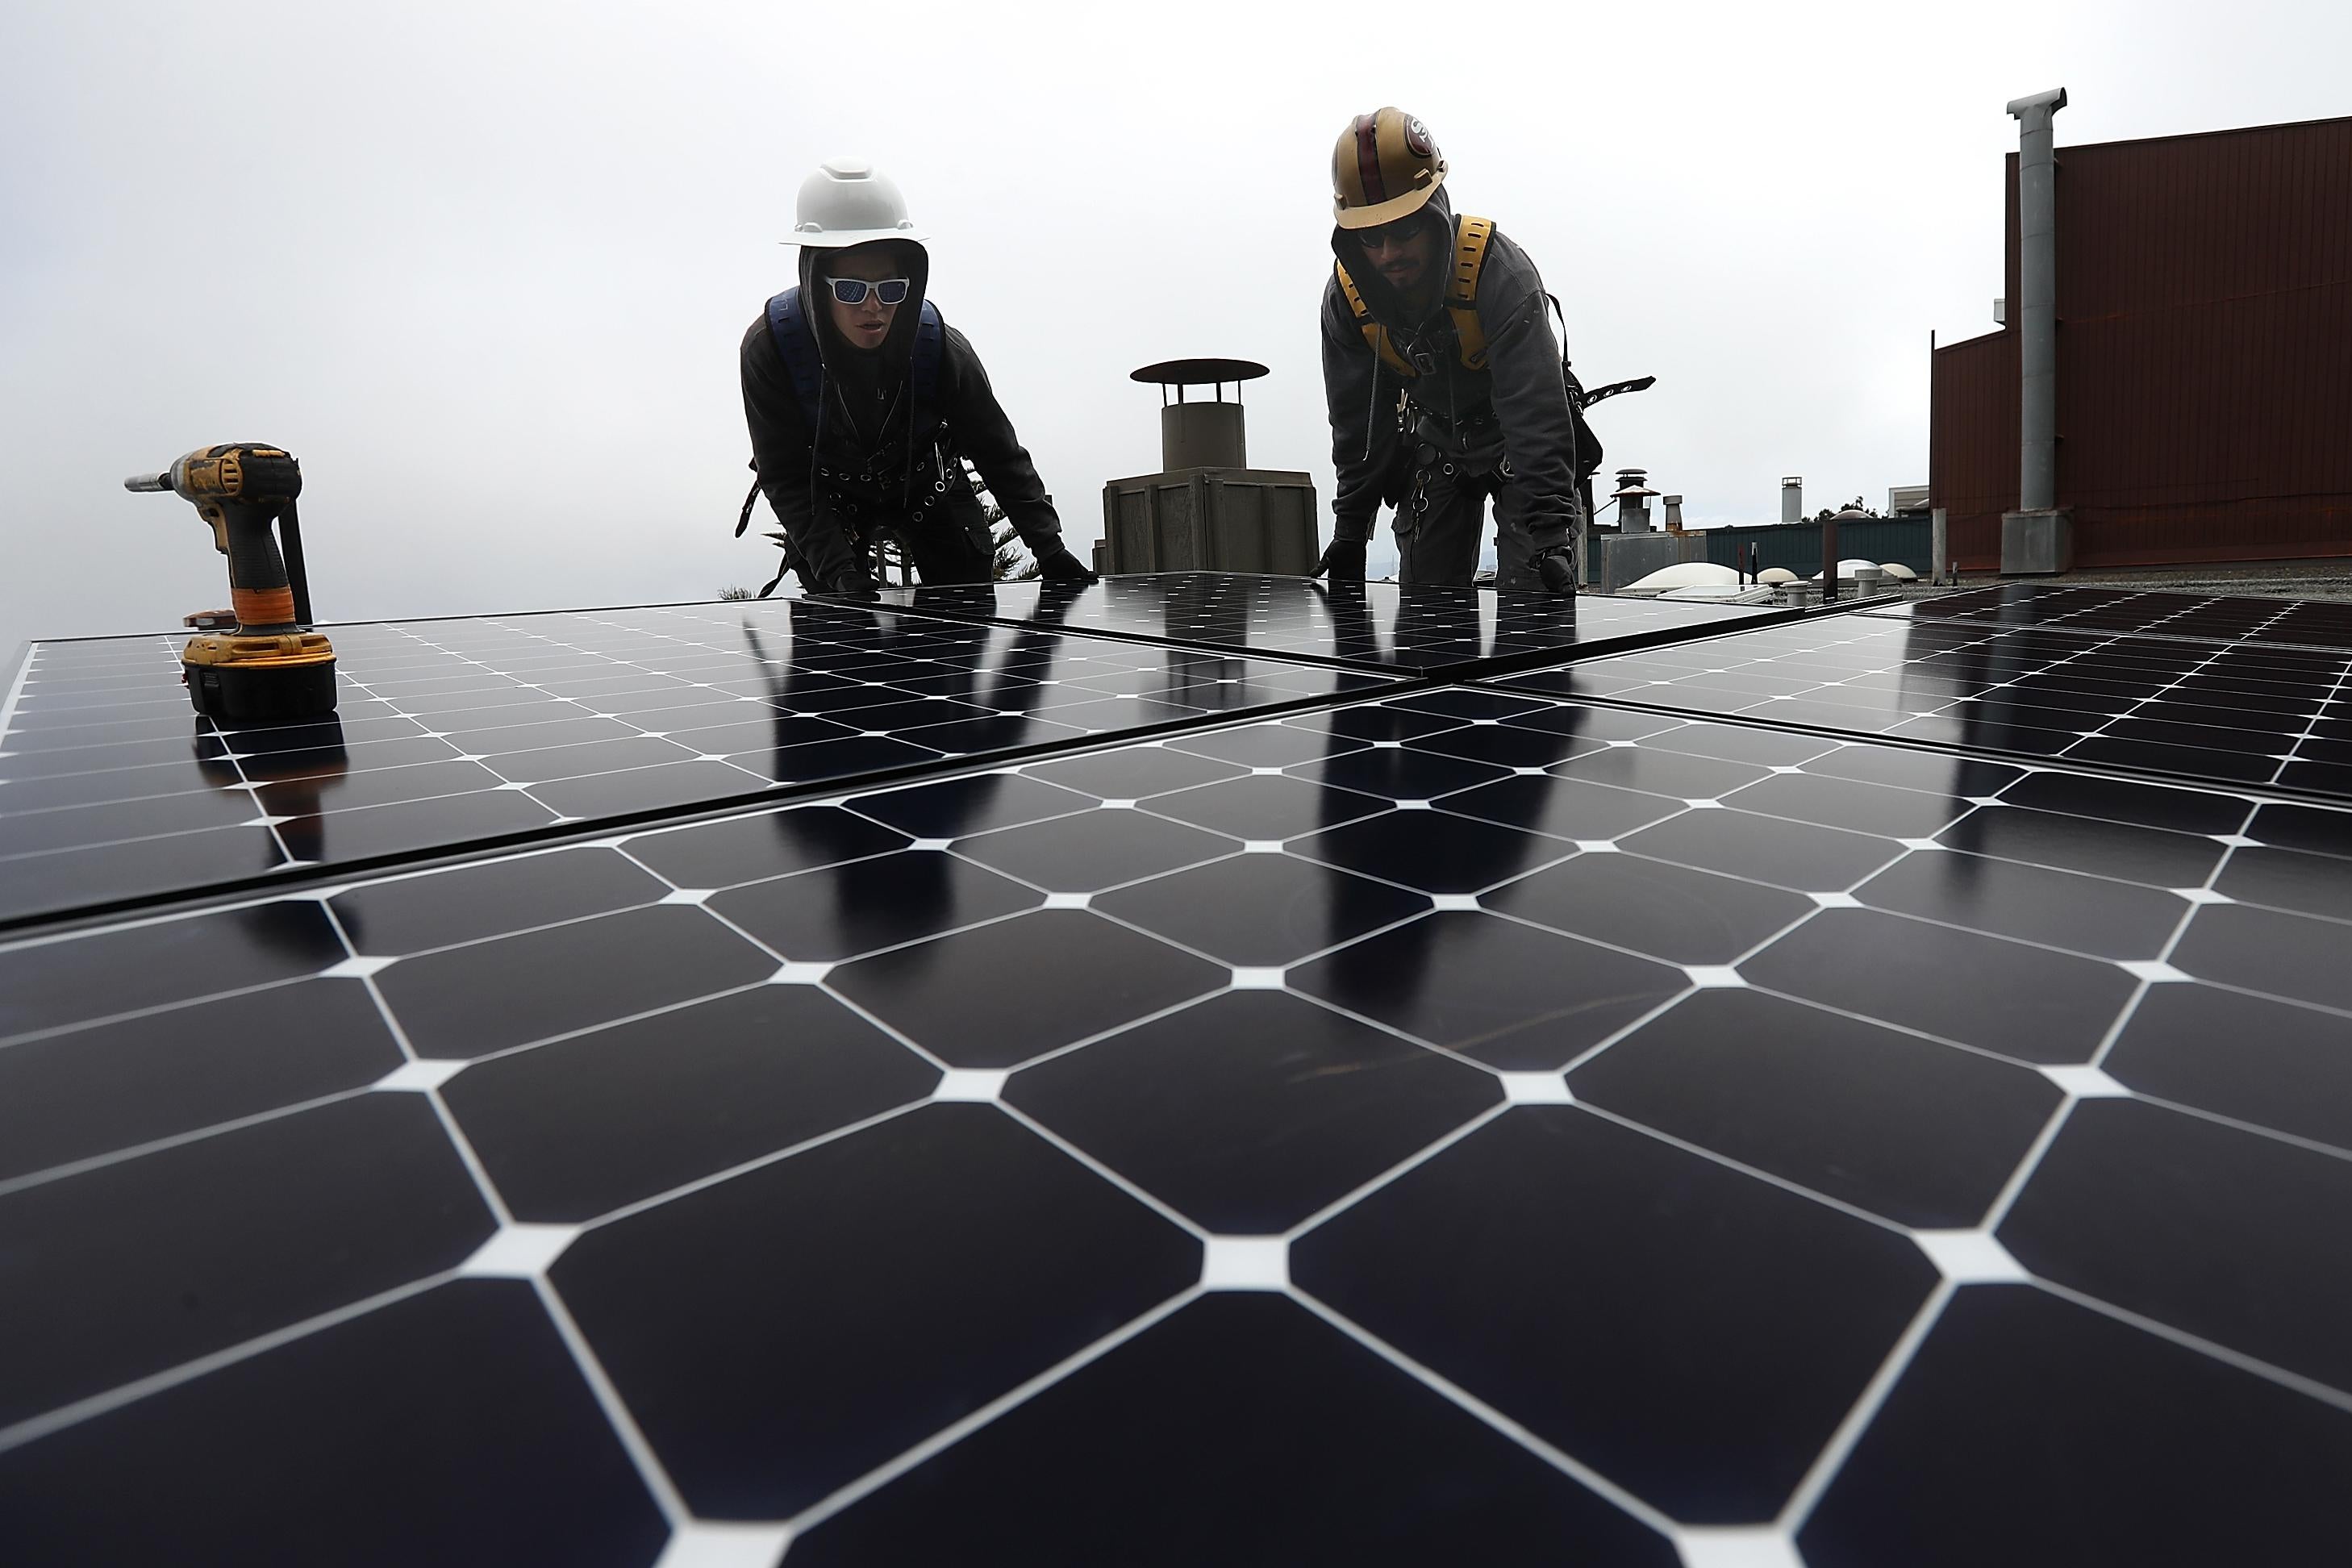 Workers of Luminalt, a solar panel company, install solar panels on the roof of a home on May 9, 2018 in San Francisco, California.